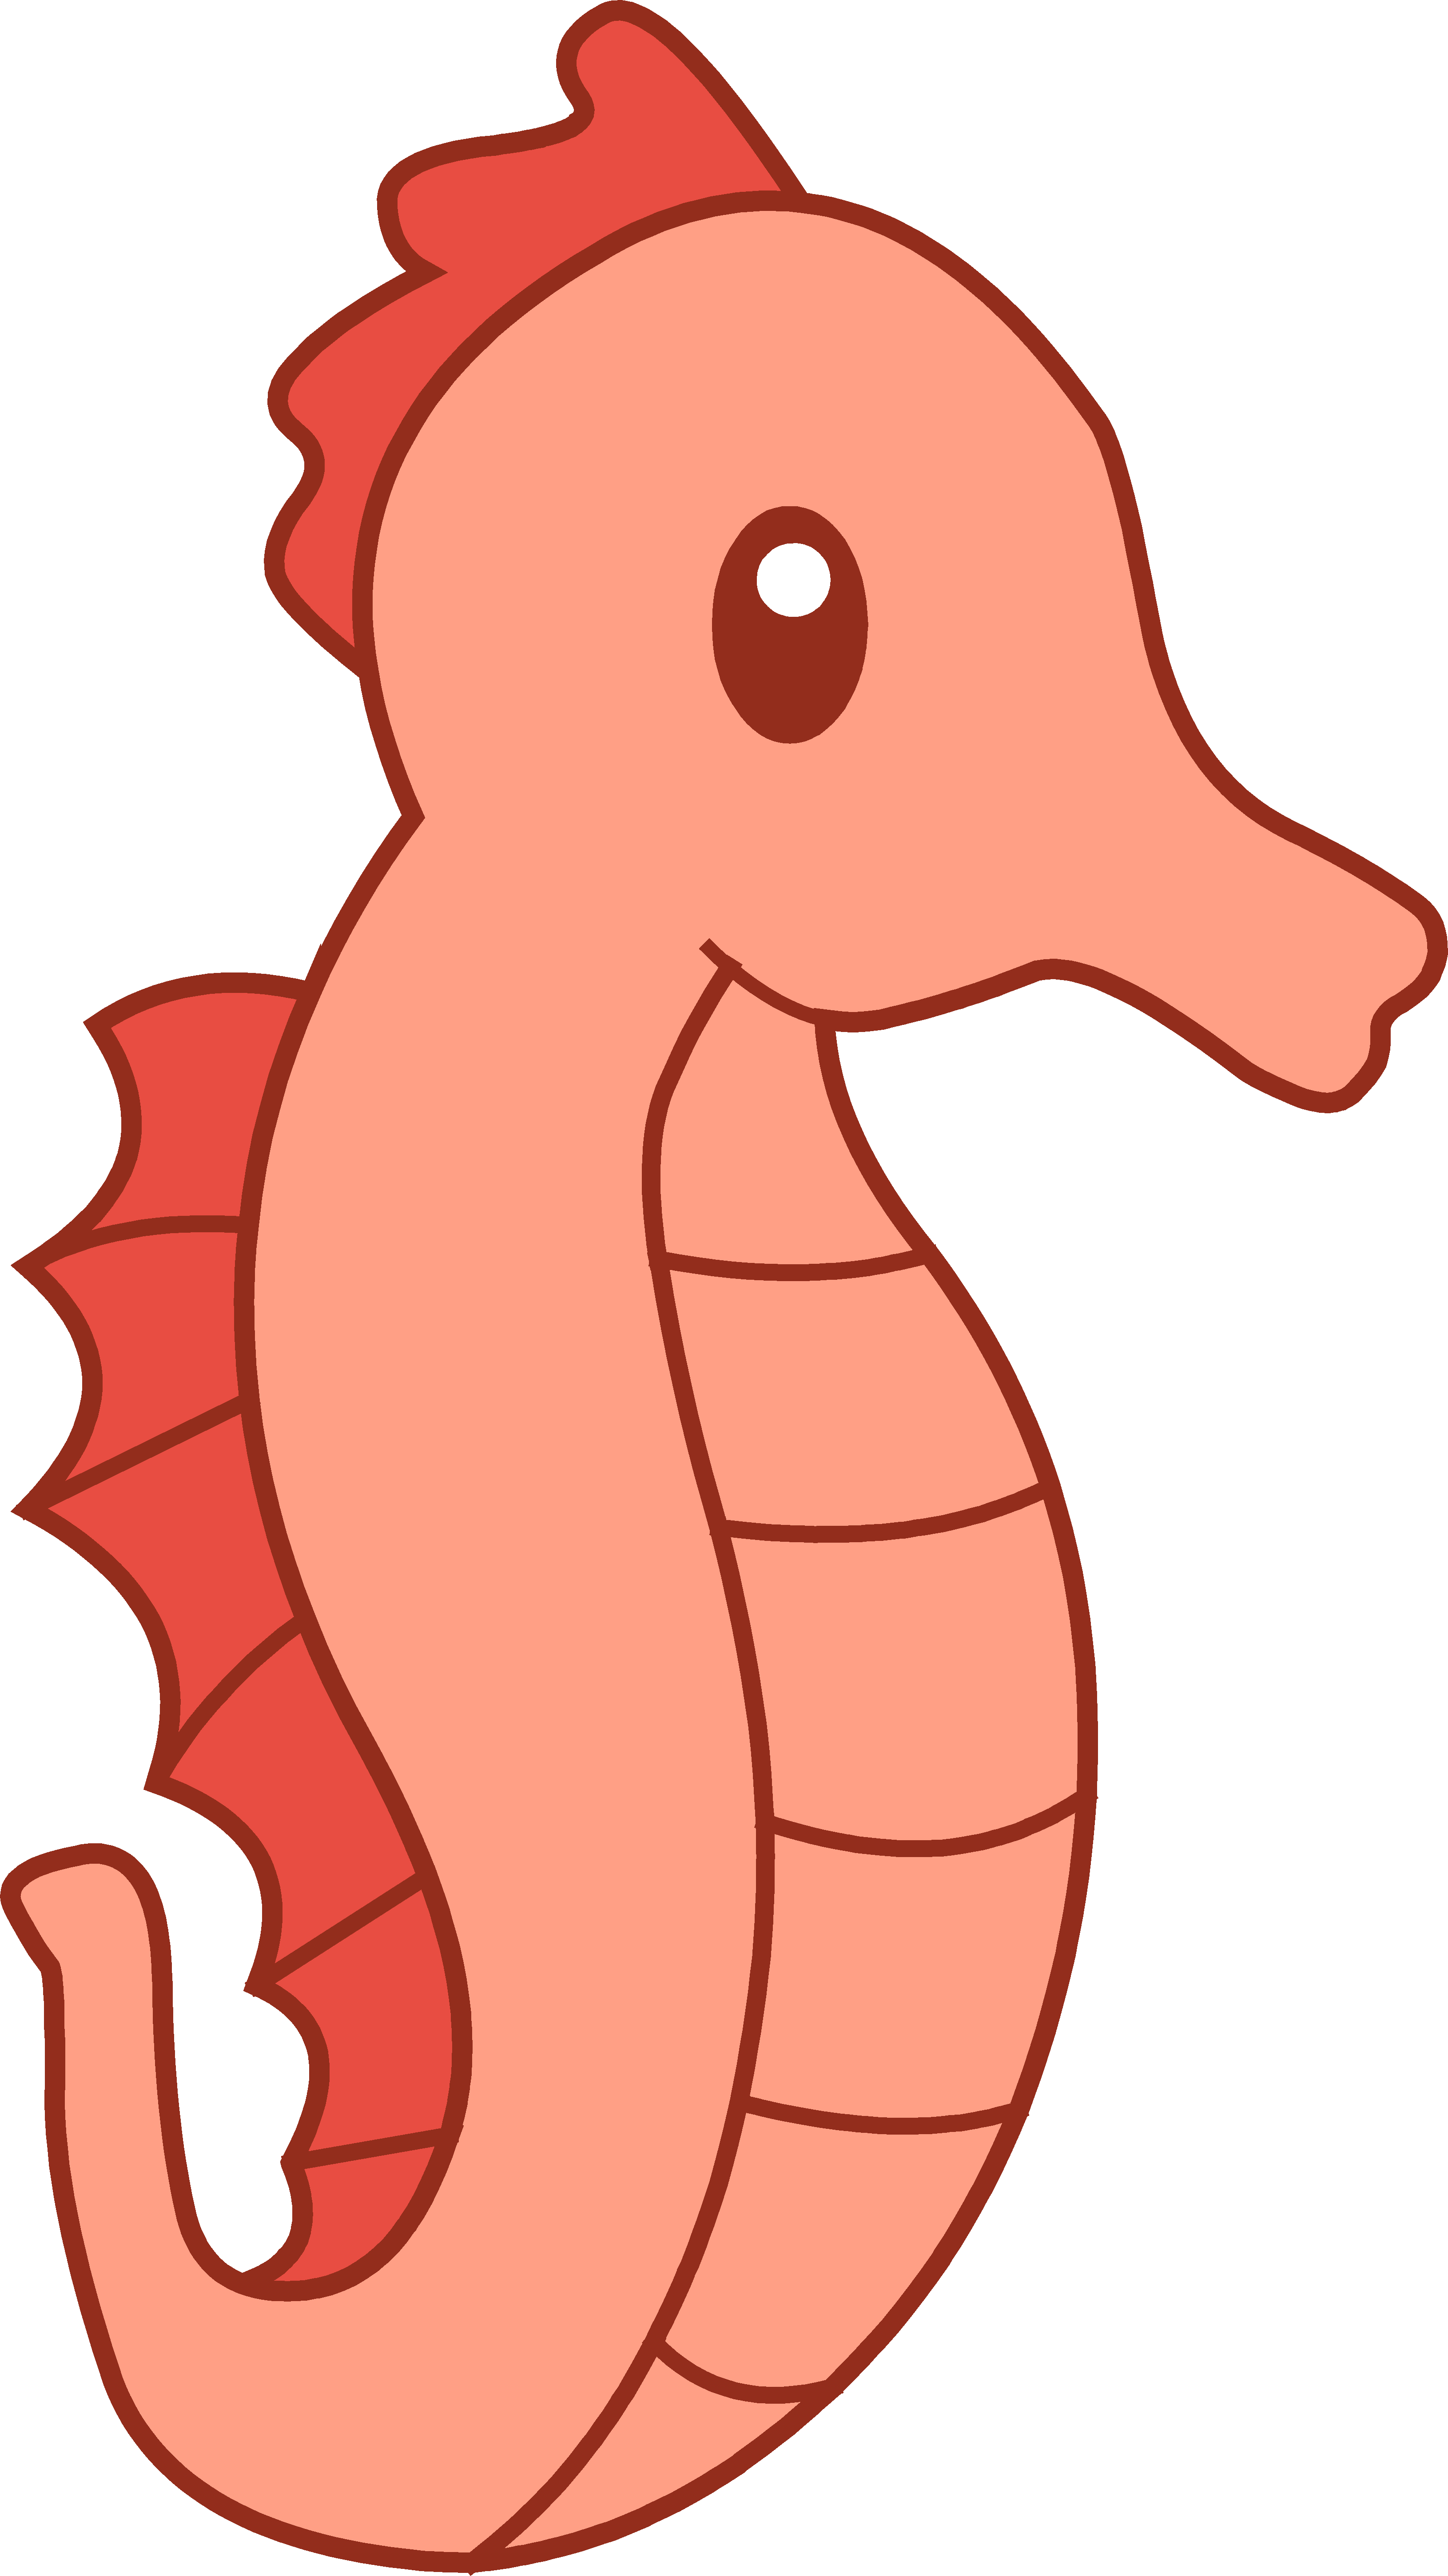 Seahorse clipart #2, Download drawings